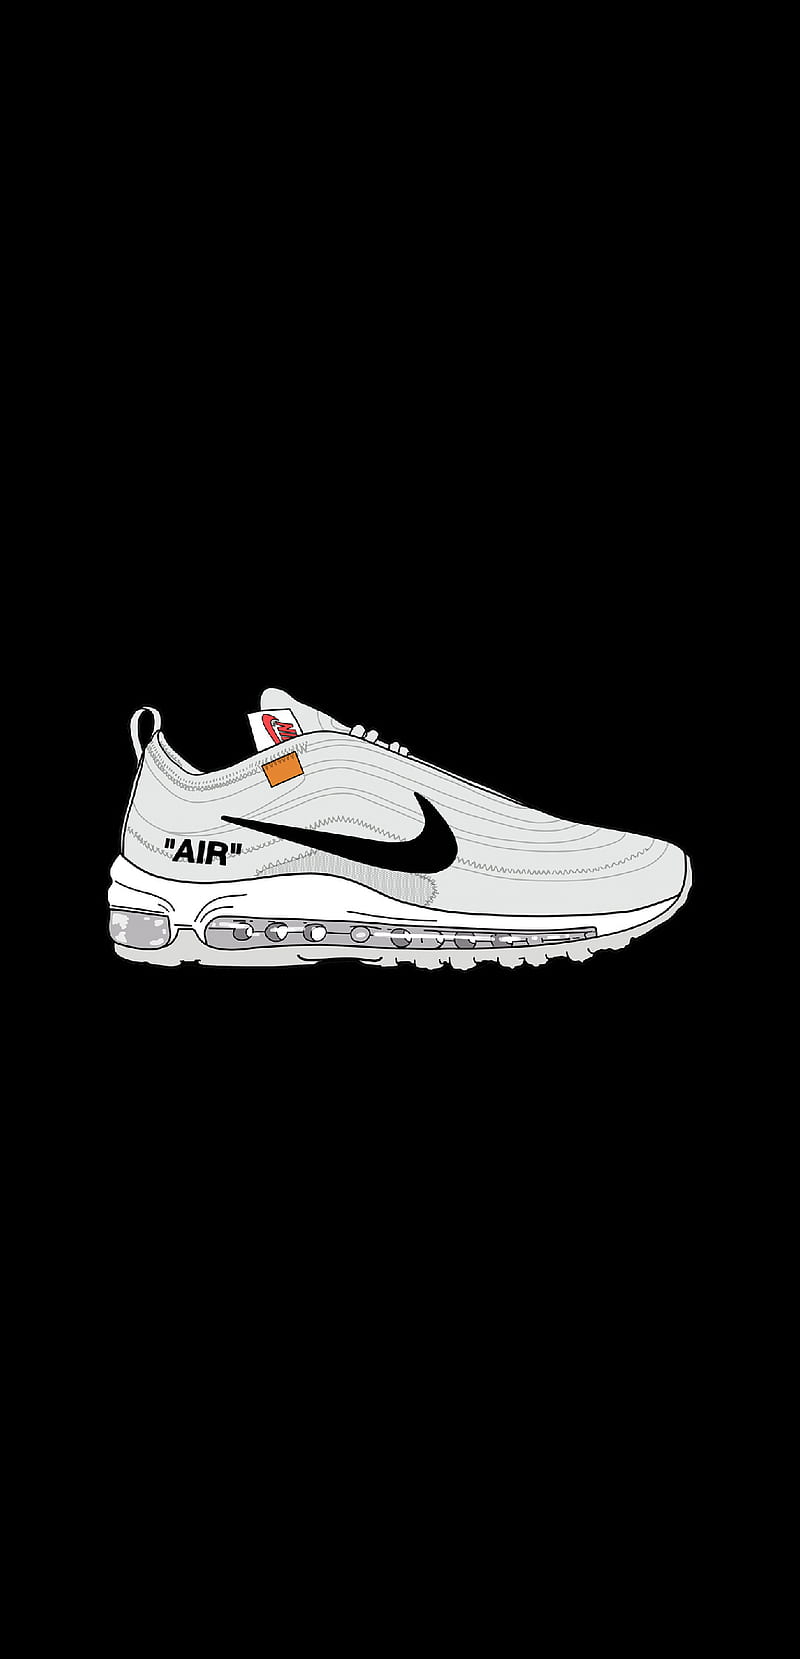 Nike Tn Air Max Plus Moon Mouse Pooh Power Real Sailor Super Hd Mobile Wallpaper Peakpx